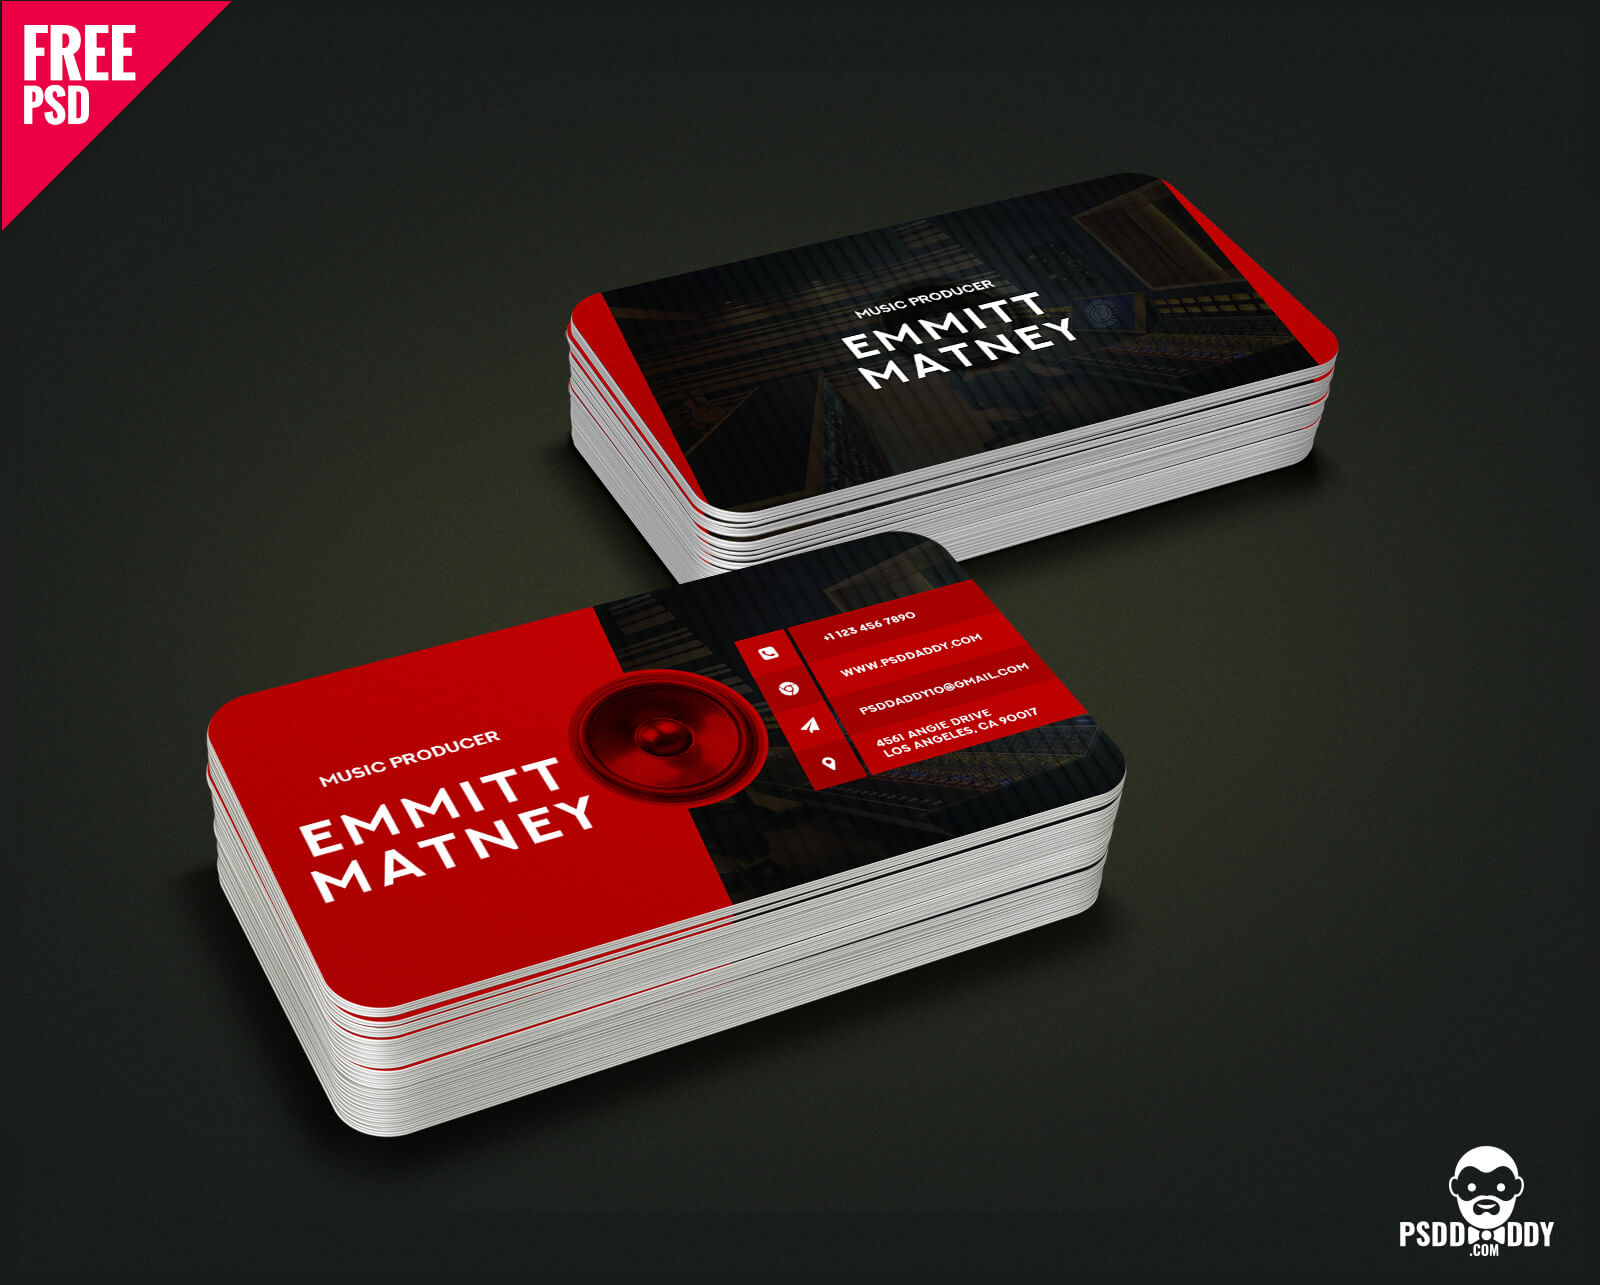 Download] Music Visiting Card Free Psd | Psddaddy With Free Psd Visiting Card Templates Download